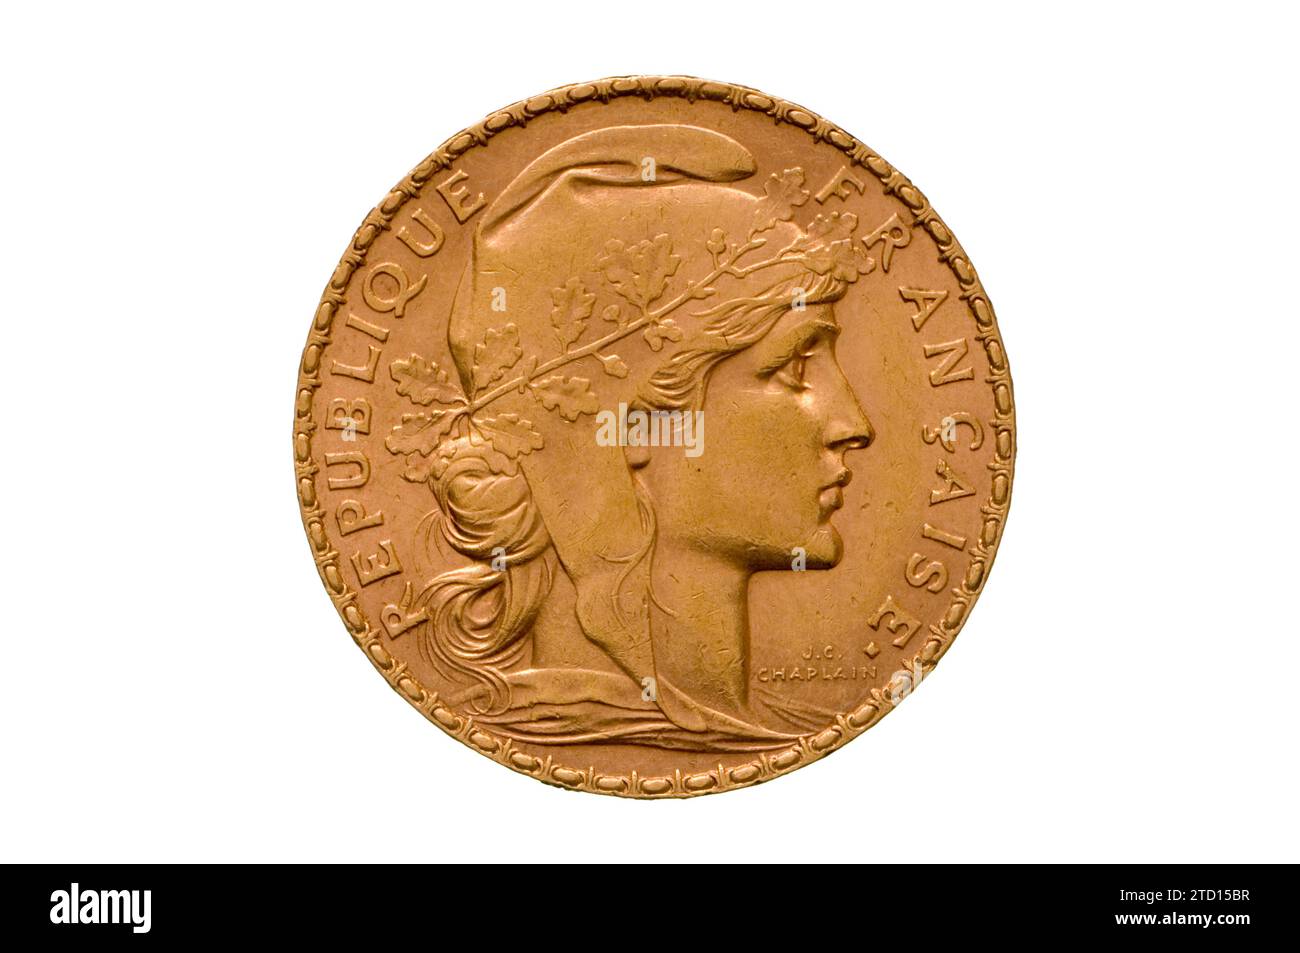 French Gold 20 Franc Coin Foto Stock